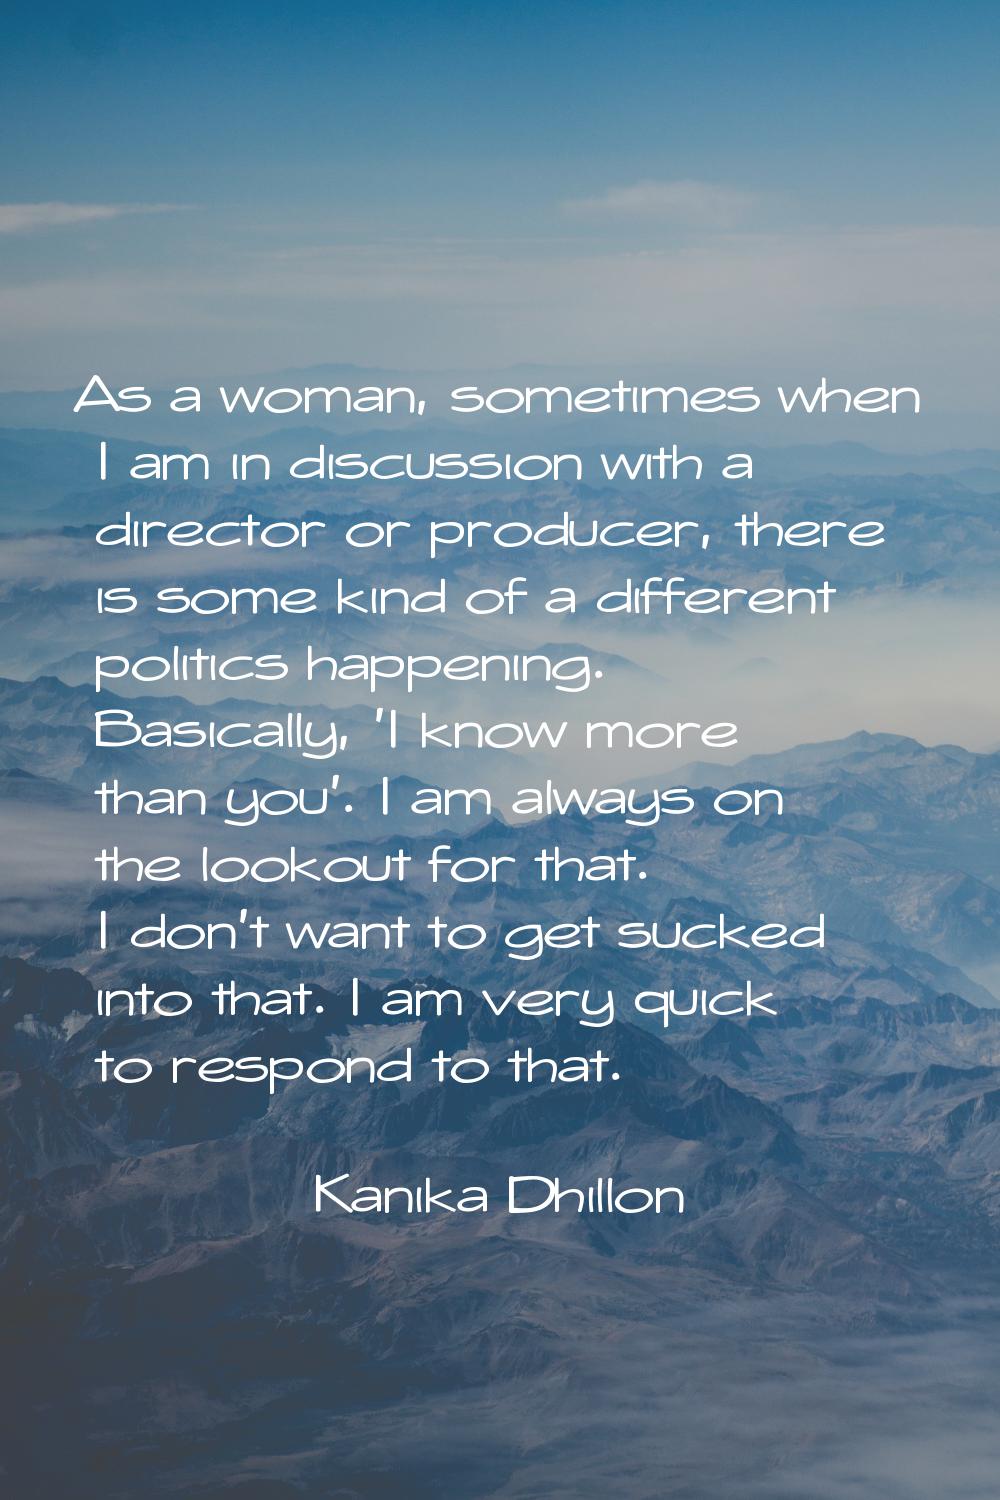 As a woman, sometimes when I am in discussion with a director or producer, there is some kind of a 